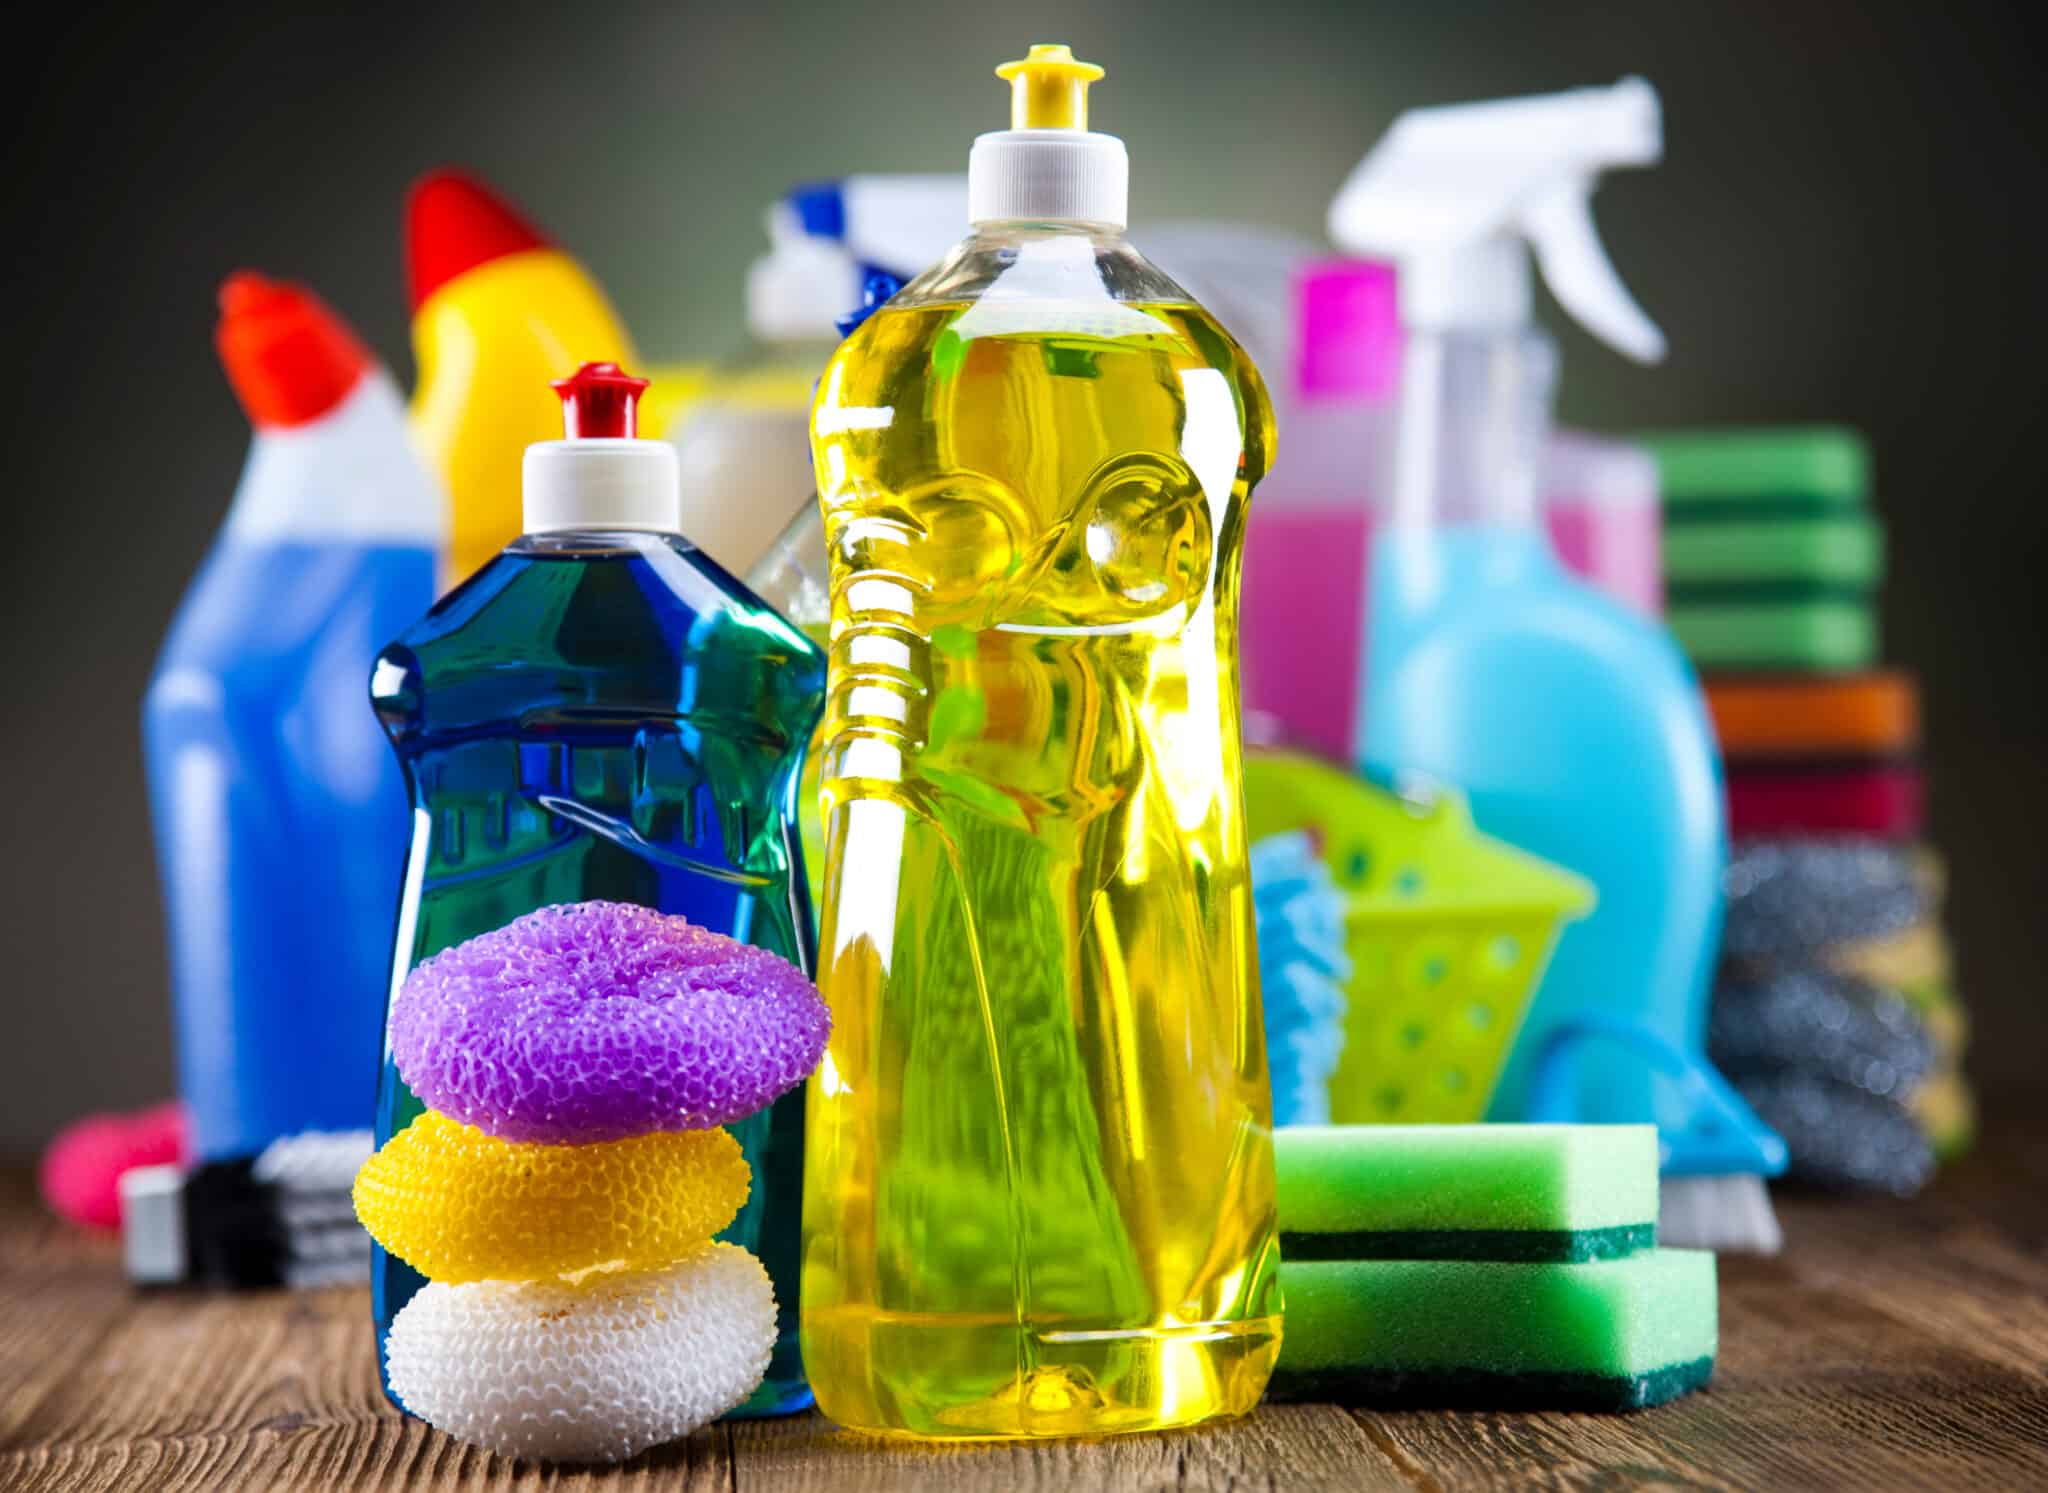 Professional House Cleaning Supplies List